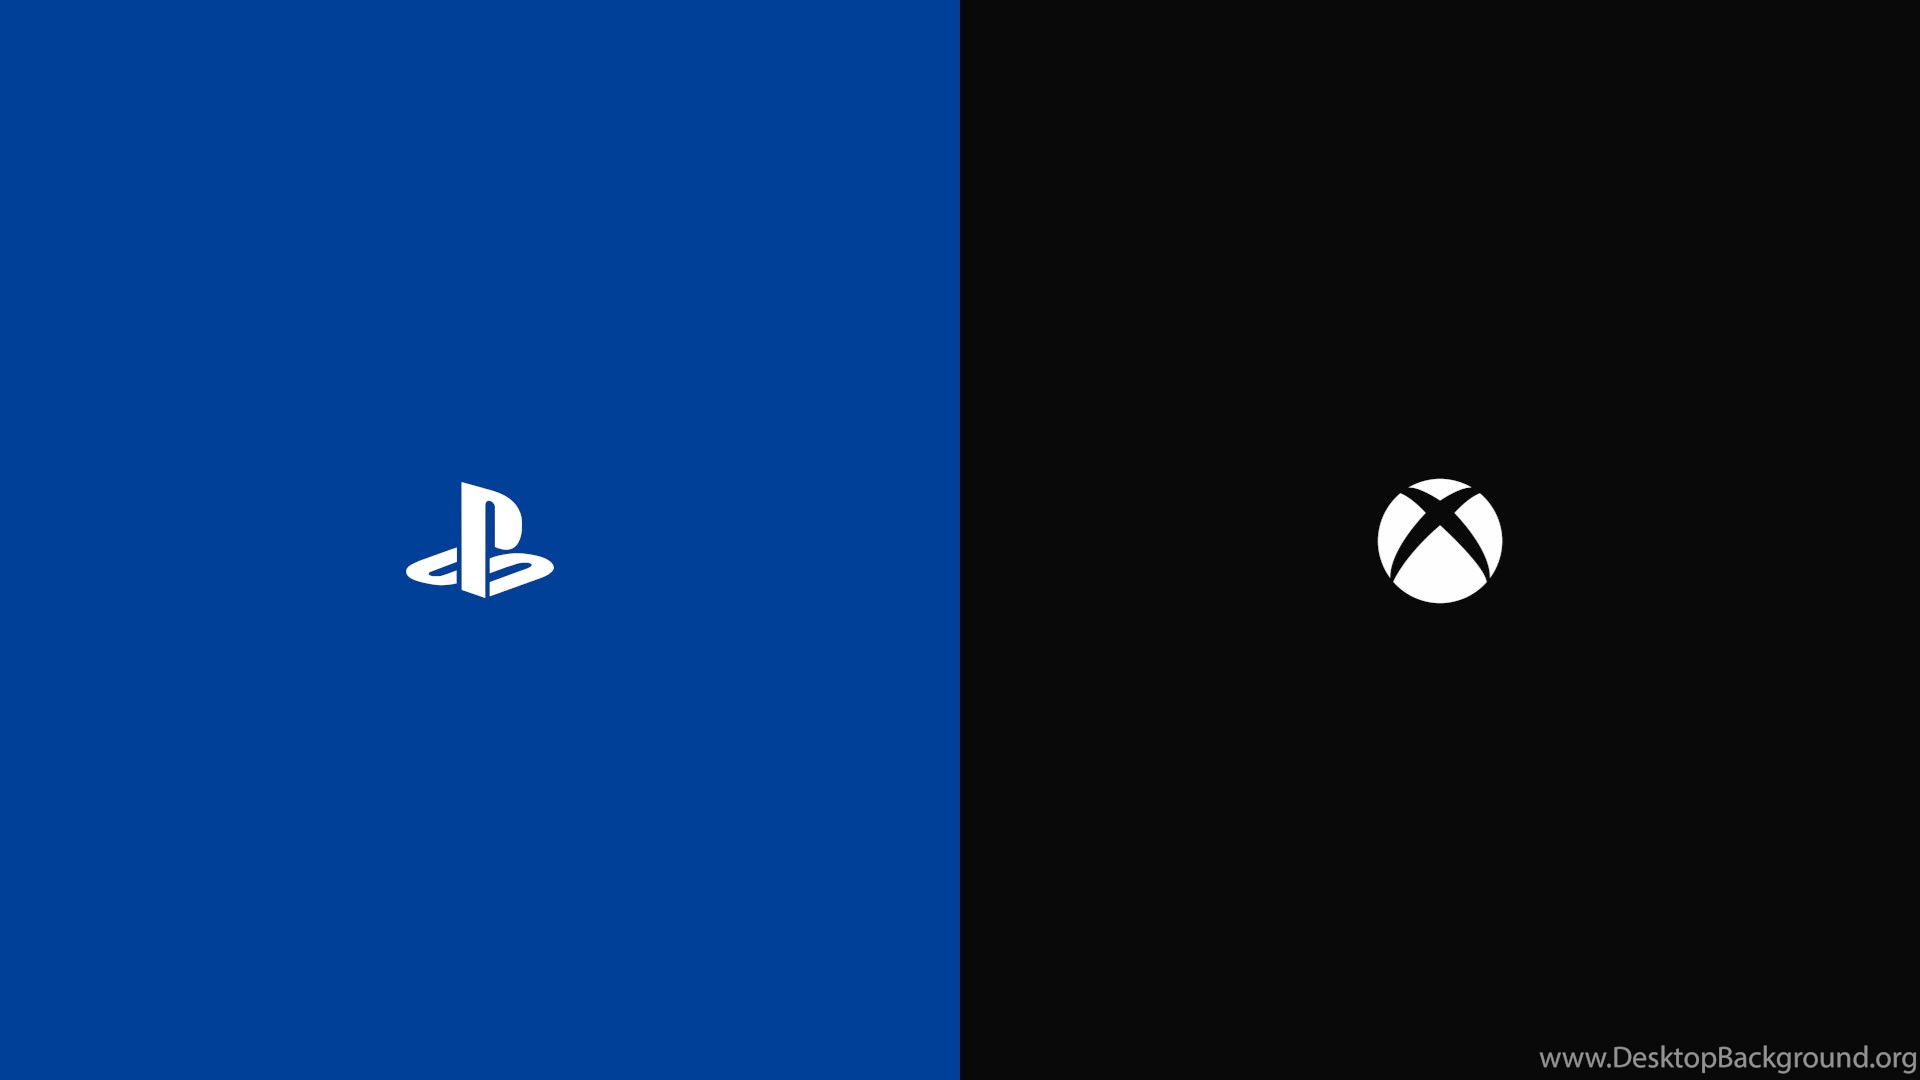 PS4 and Xbox Wallpaper Free PS4 and Xbox Background